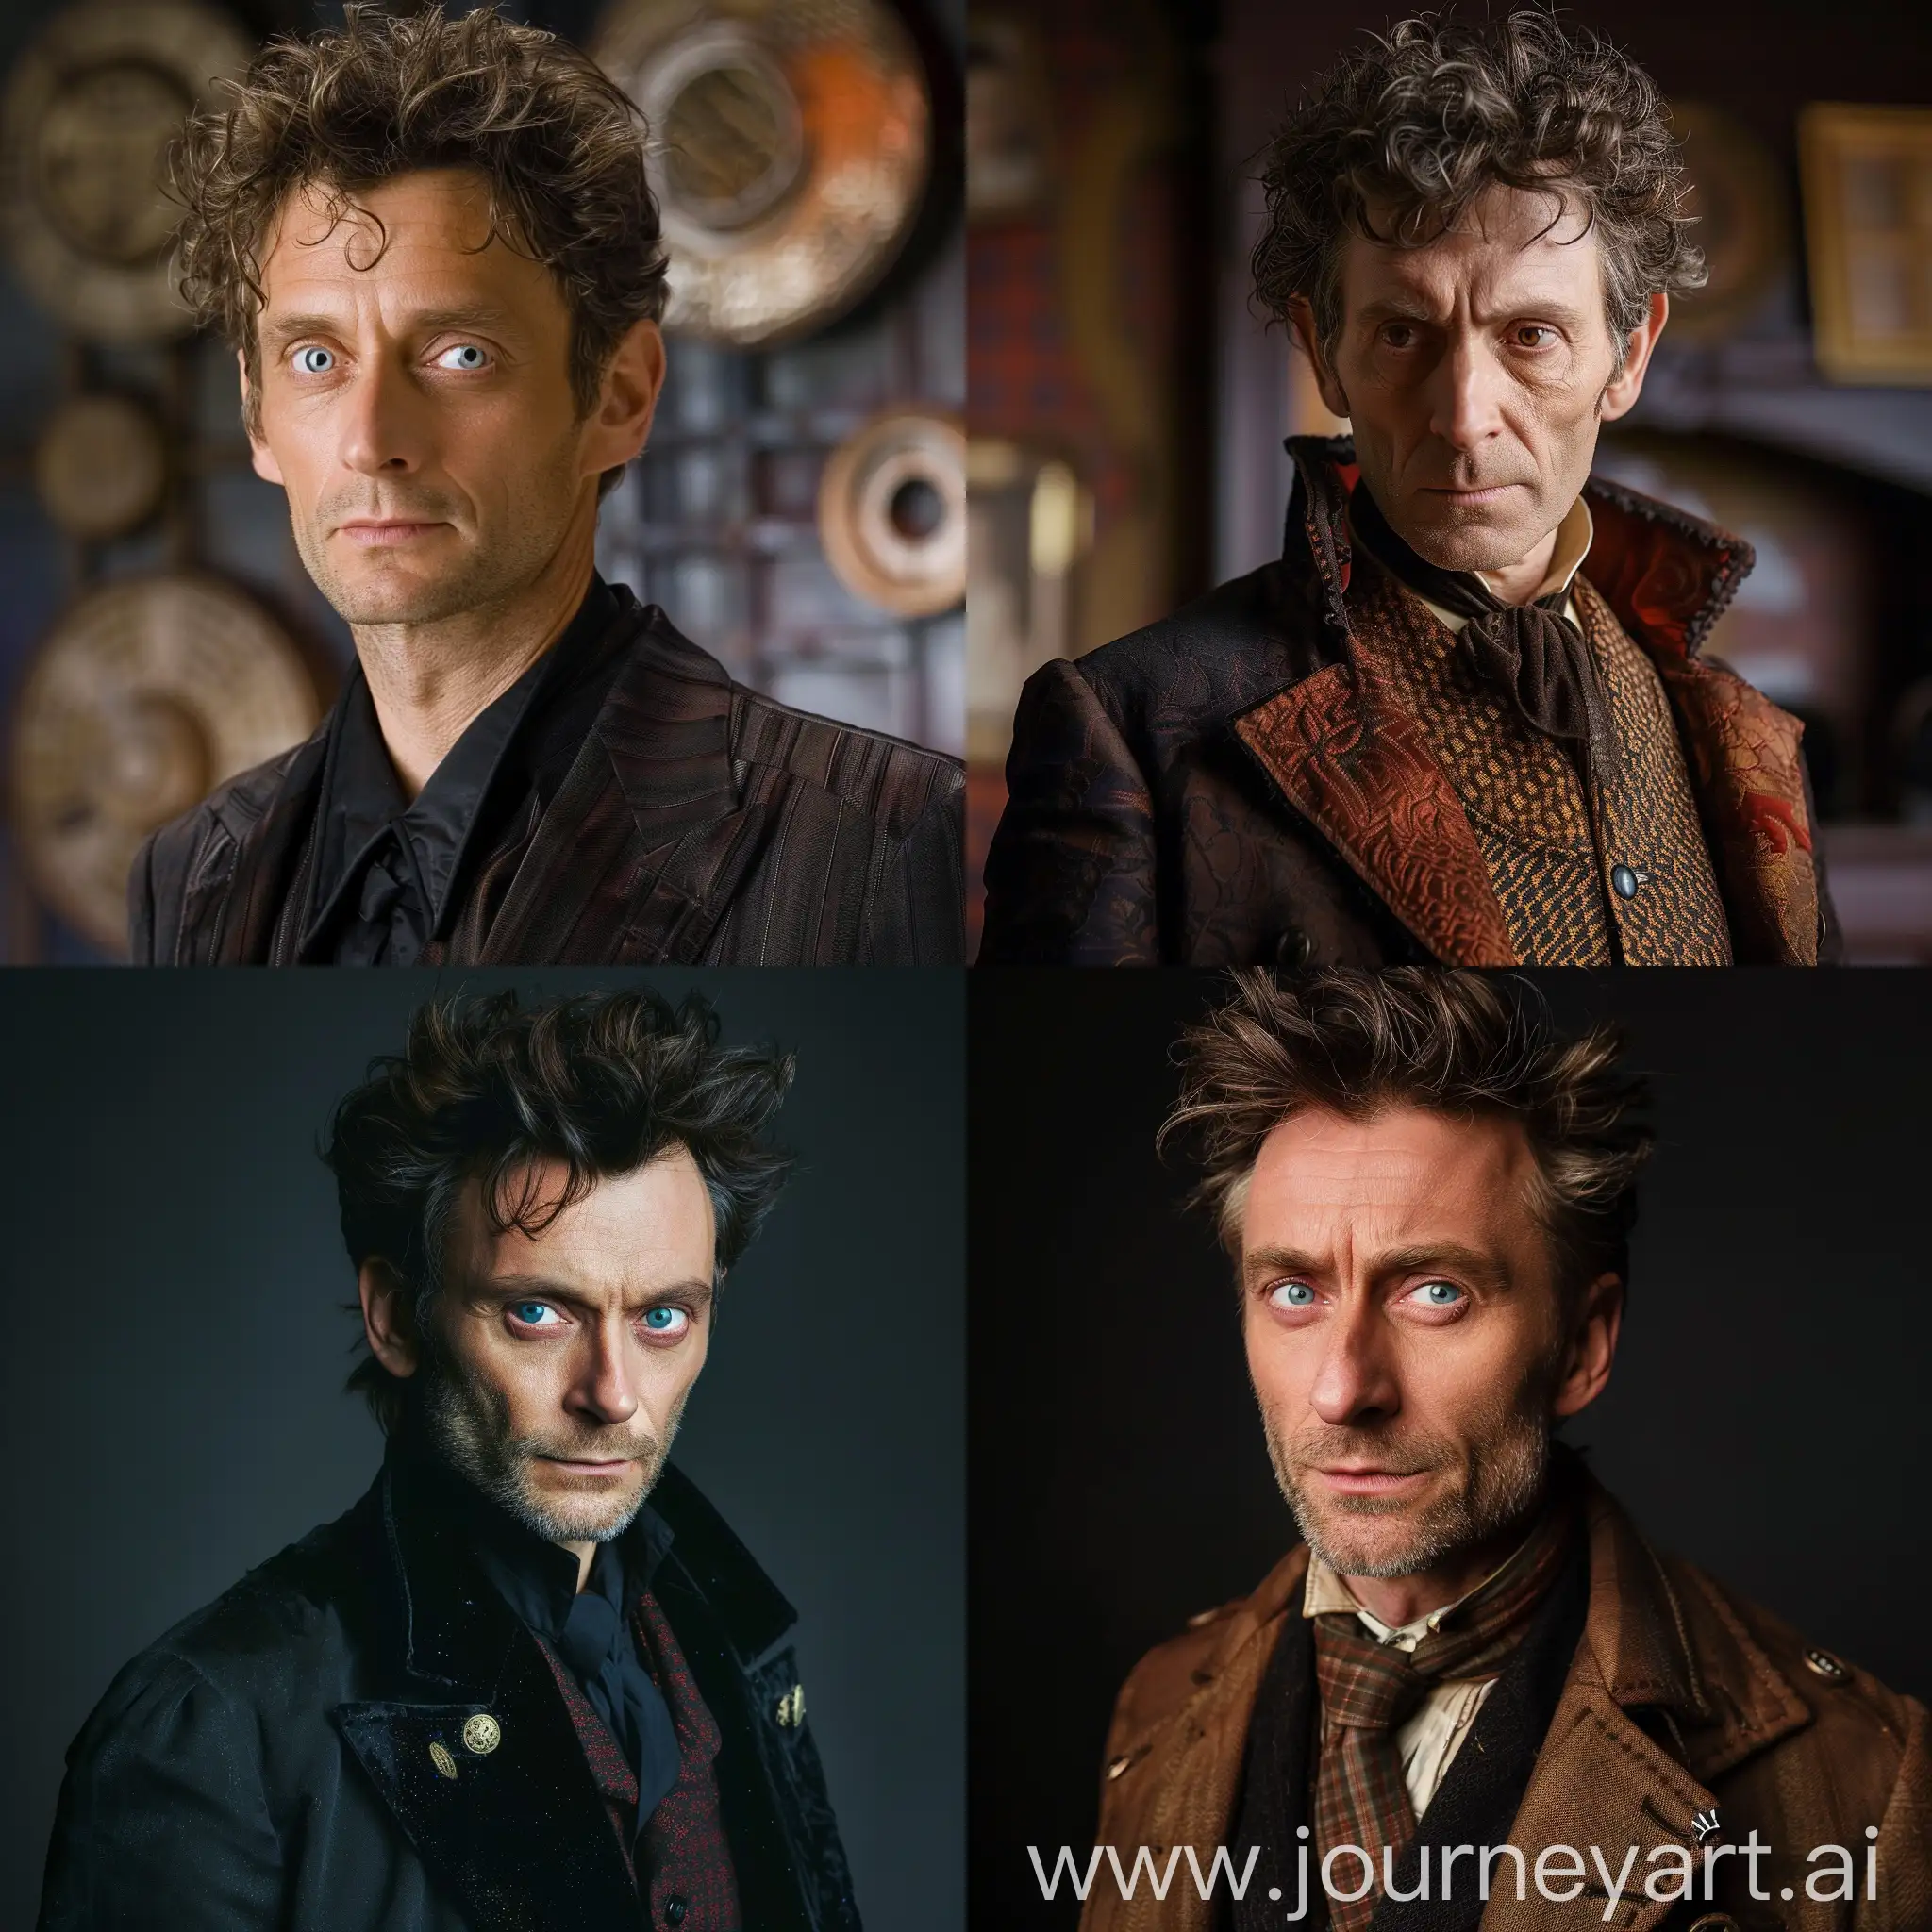 Michael-Sheen-as-Doctor-Who-Portrait-in-11-Aspect-Ratio